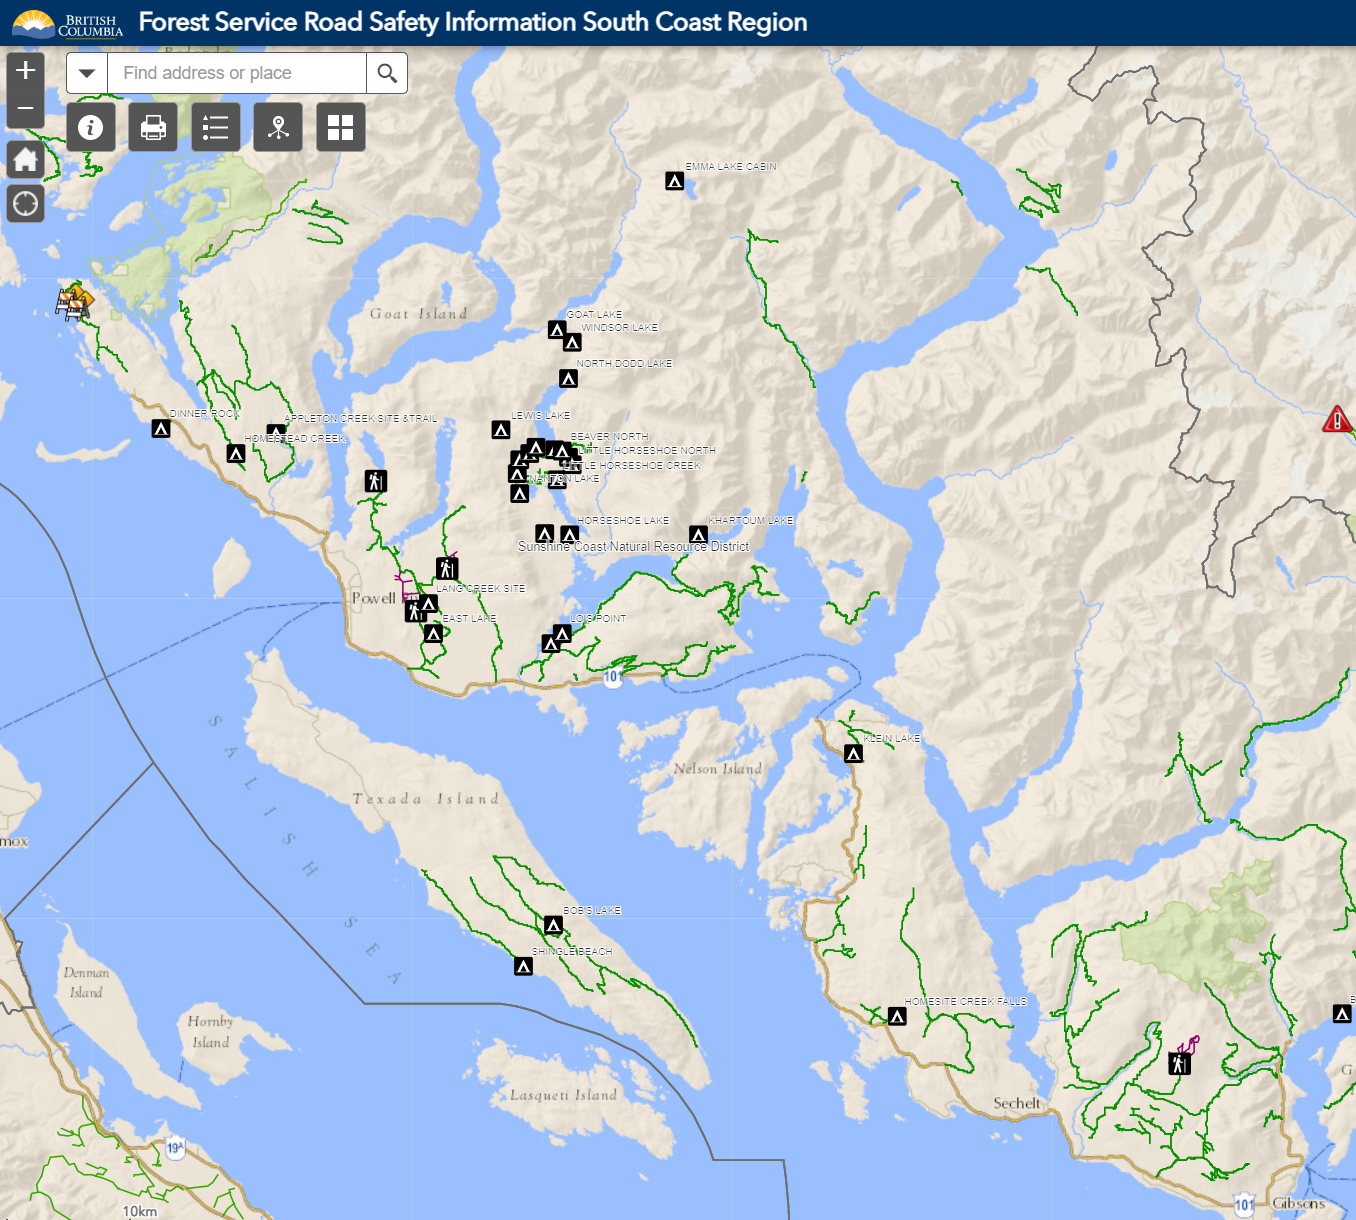 Thumbnail image of the FSR Interactive Safety map